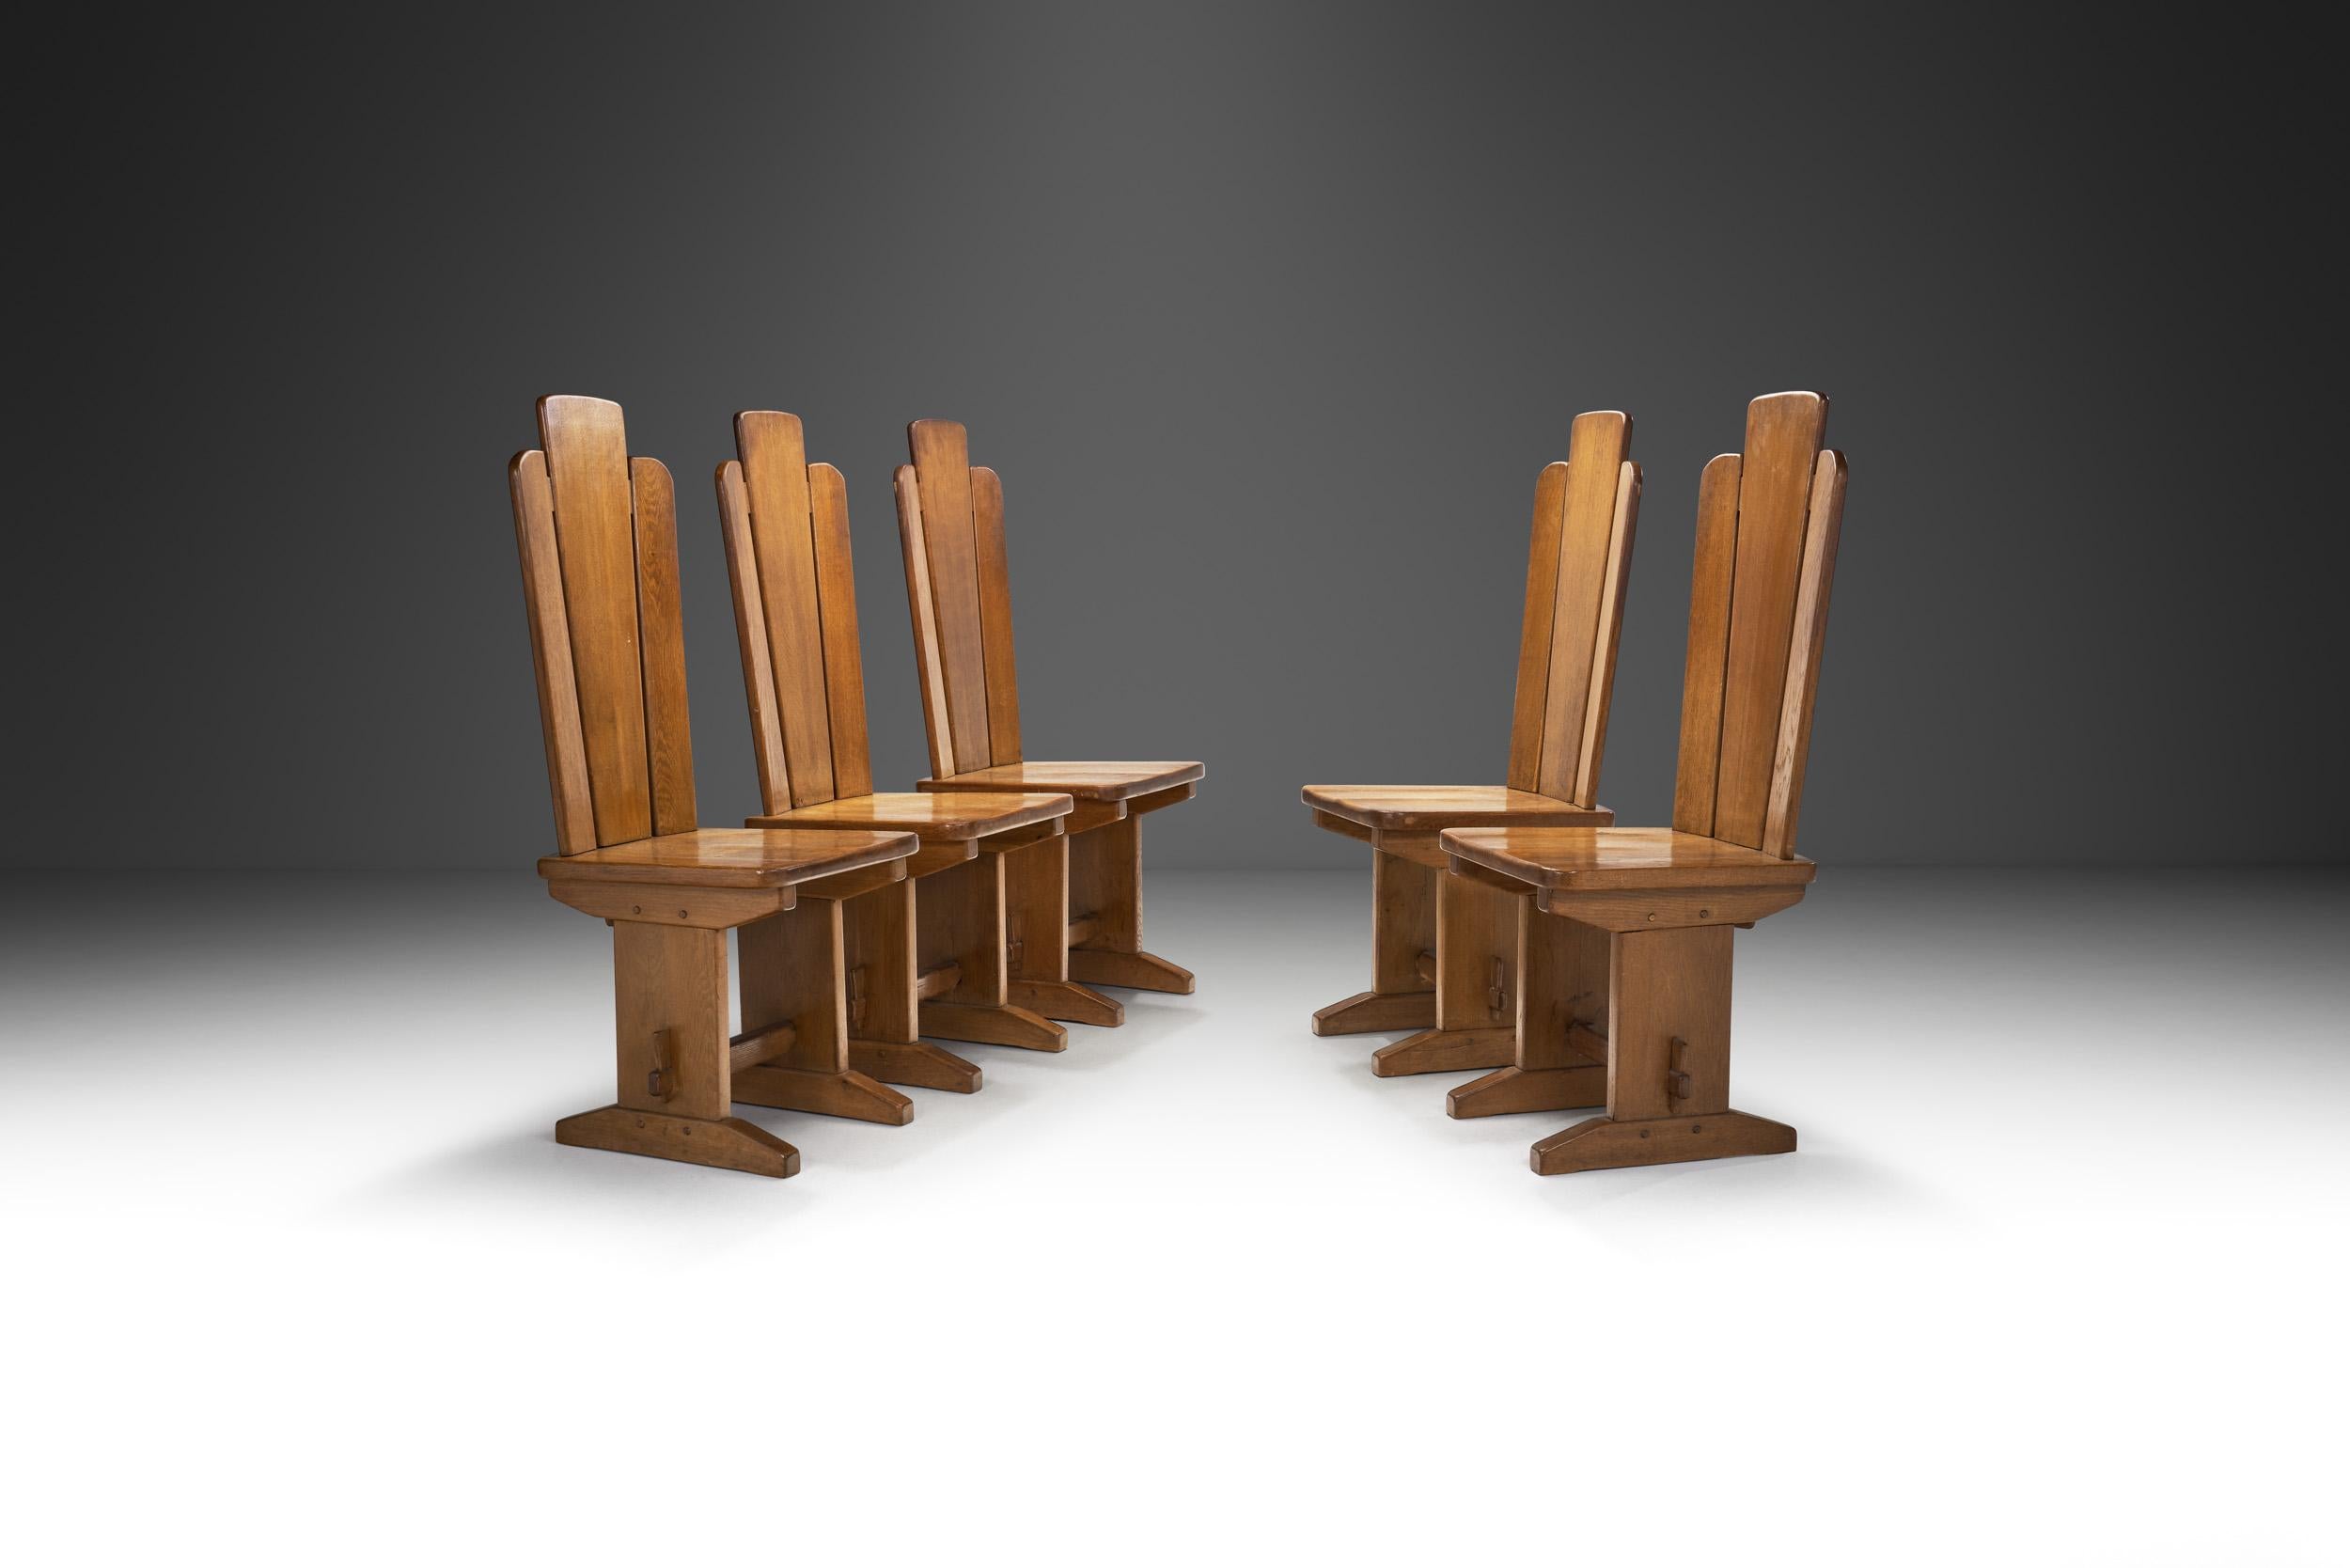 European Set of Five Brutalist Solid Oak Dining Chairs, Europe 1970s For Sale